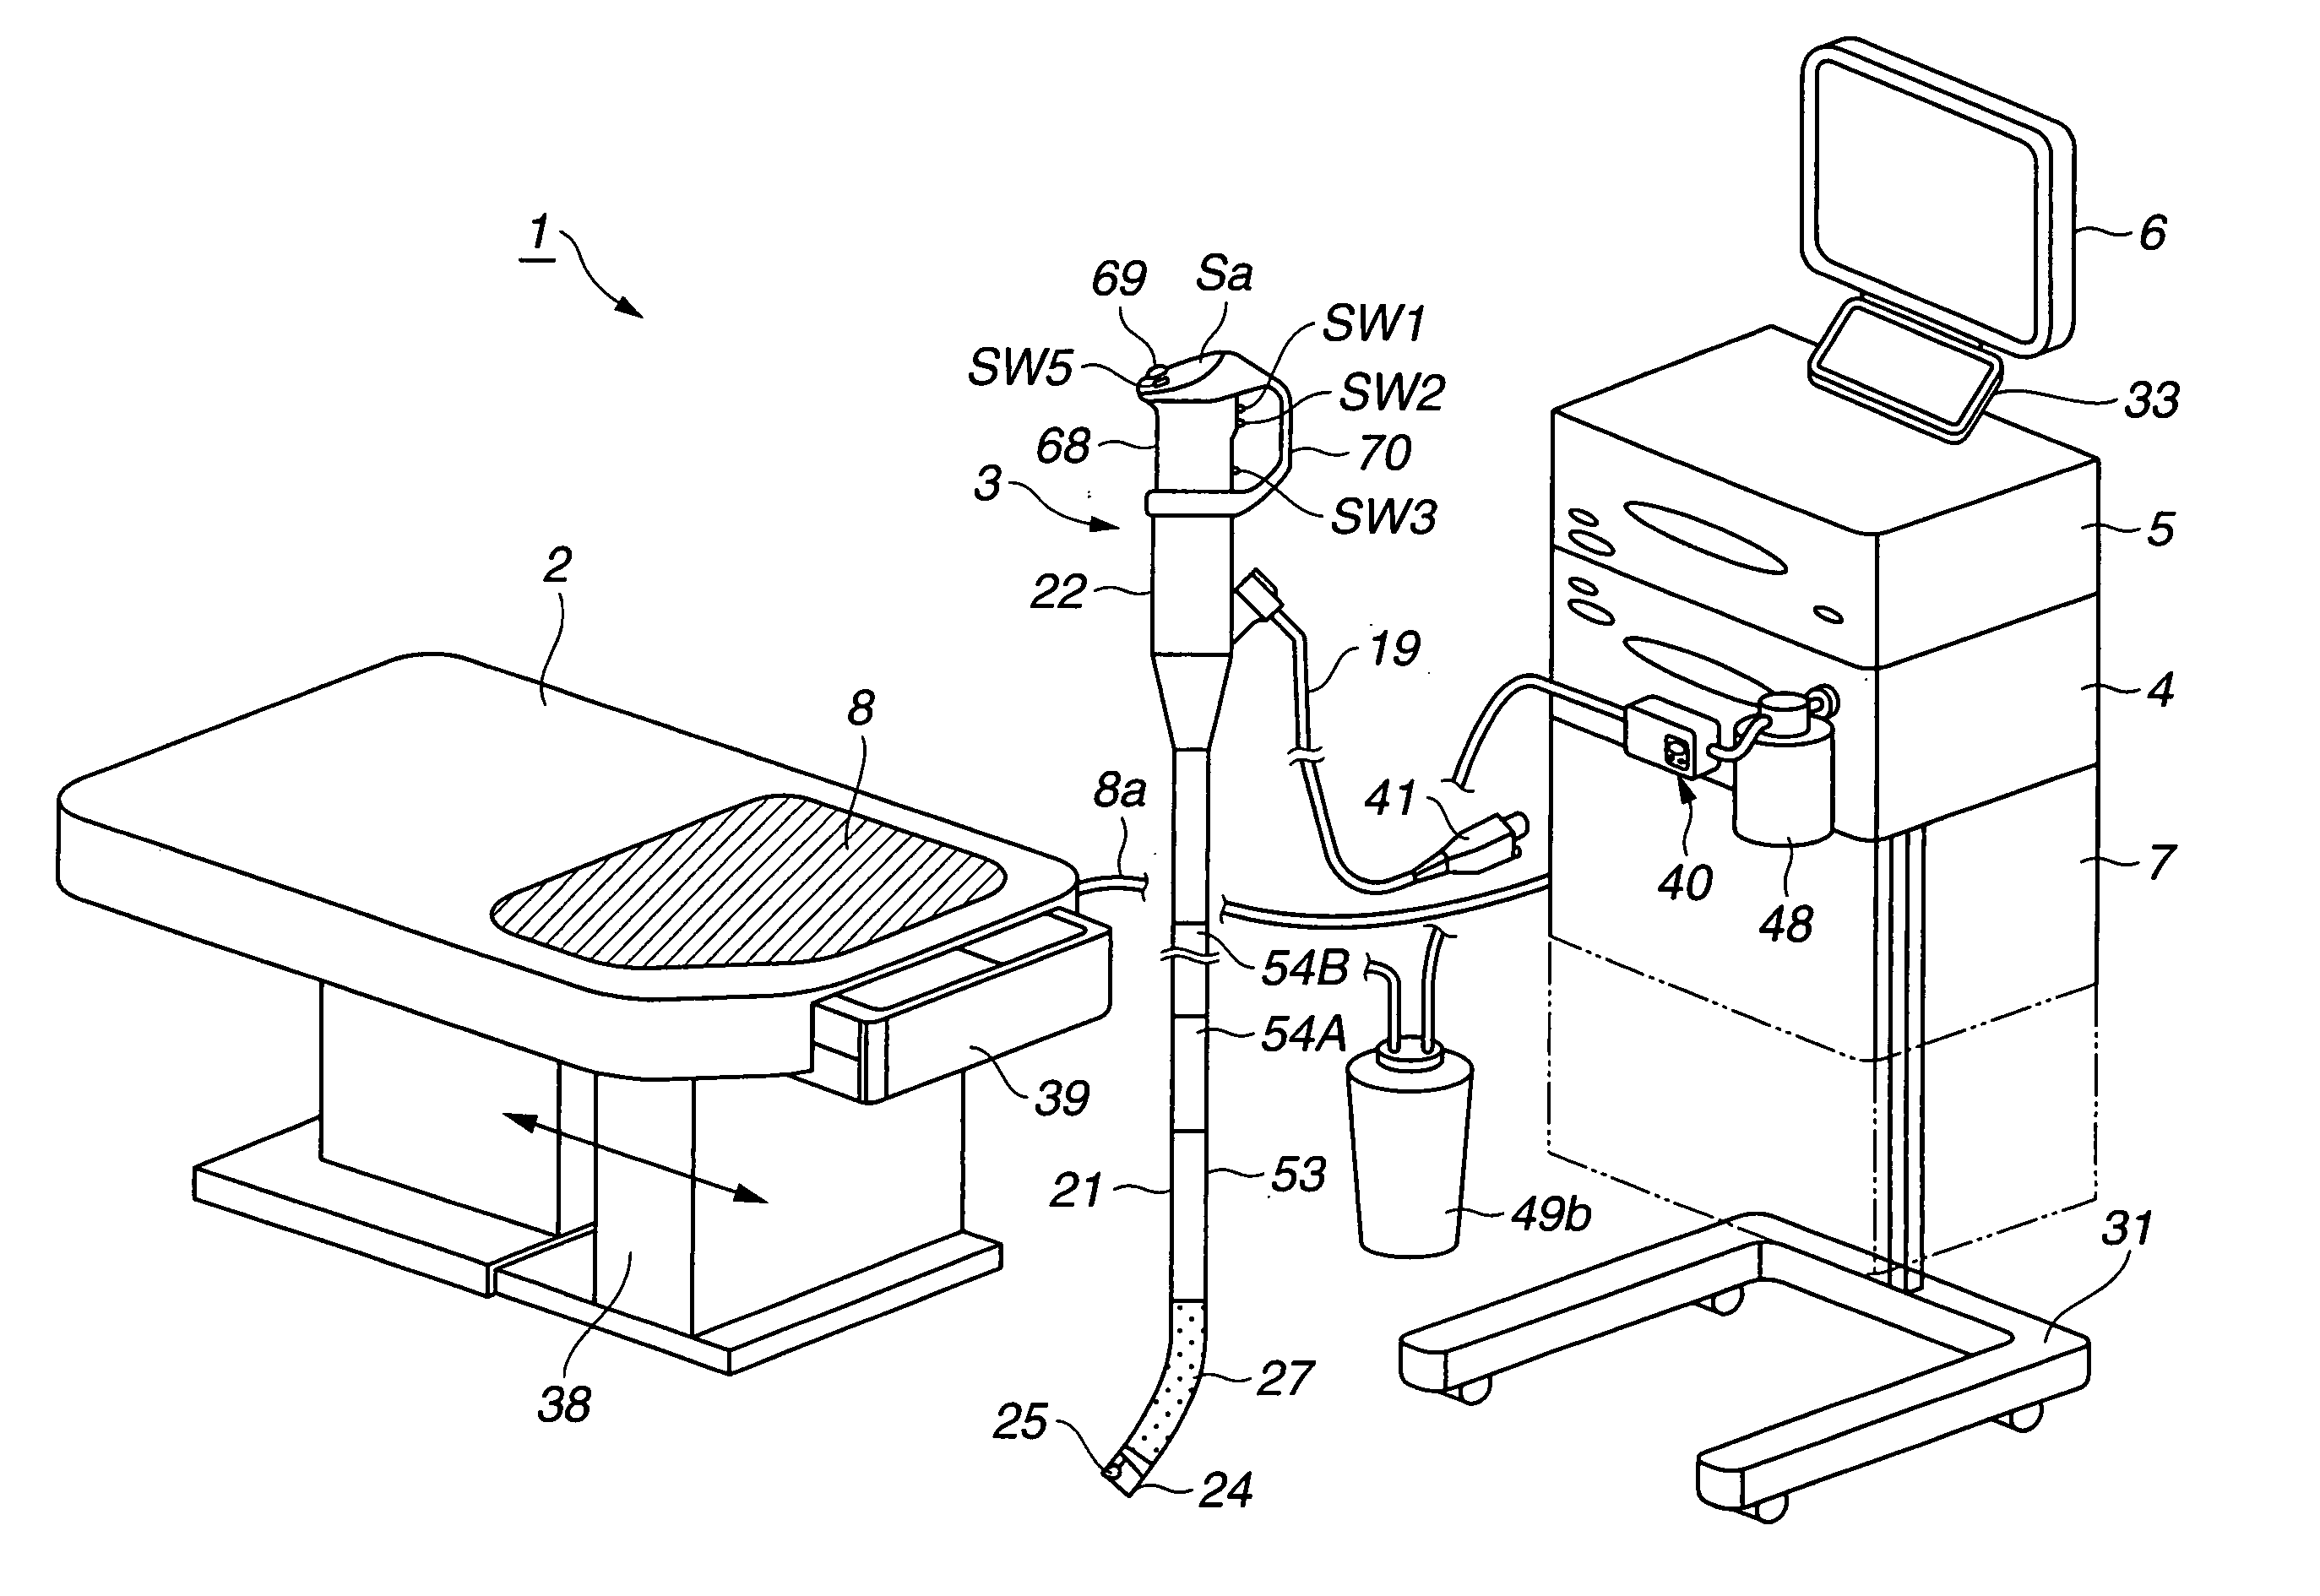 Endoscope and endoscopic system